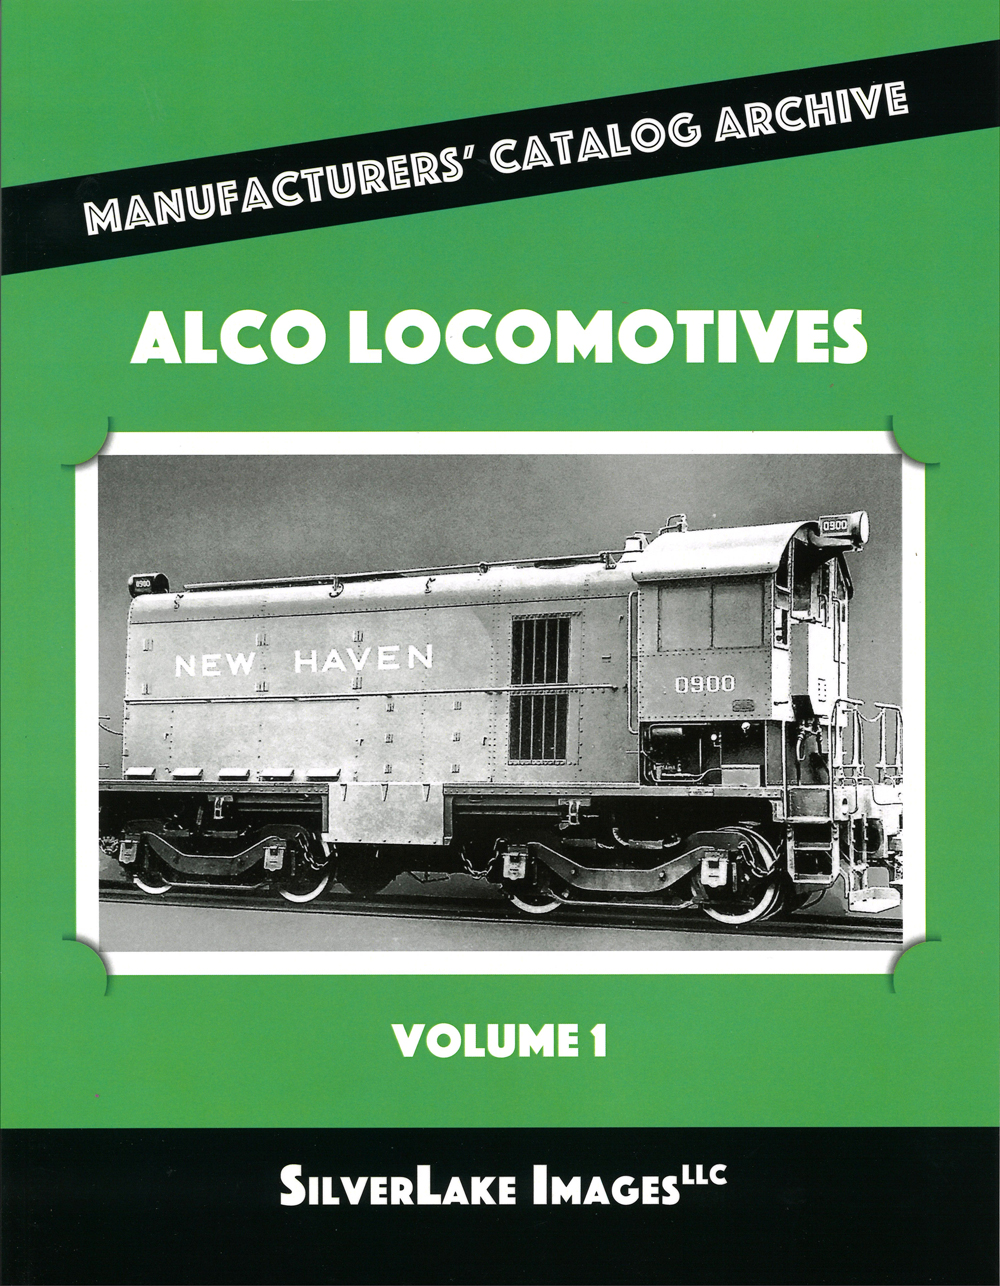 Silver Lake Images LLC Manufacturers’ Catalog Archive series Alco Locomotives Volume 1.